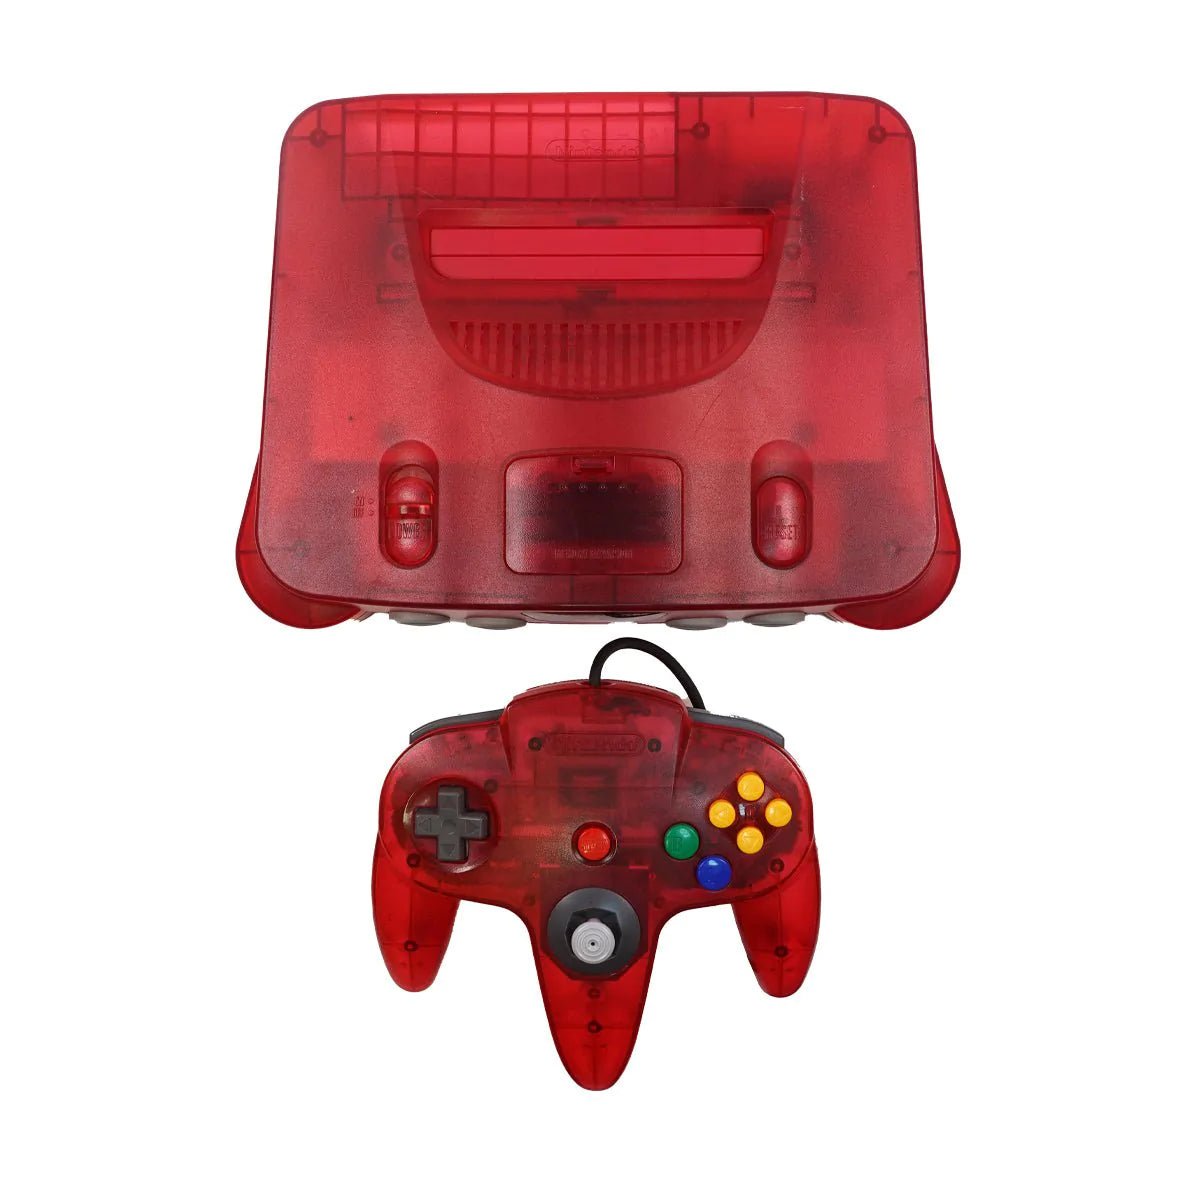 (Pre-Owned) Nintendo 64 Video Game Console - Transparent Red - ريترو - Store 974 | ستور ٩٧٤